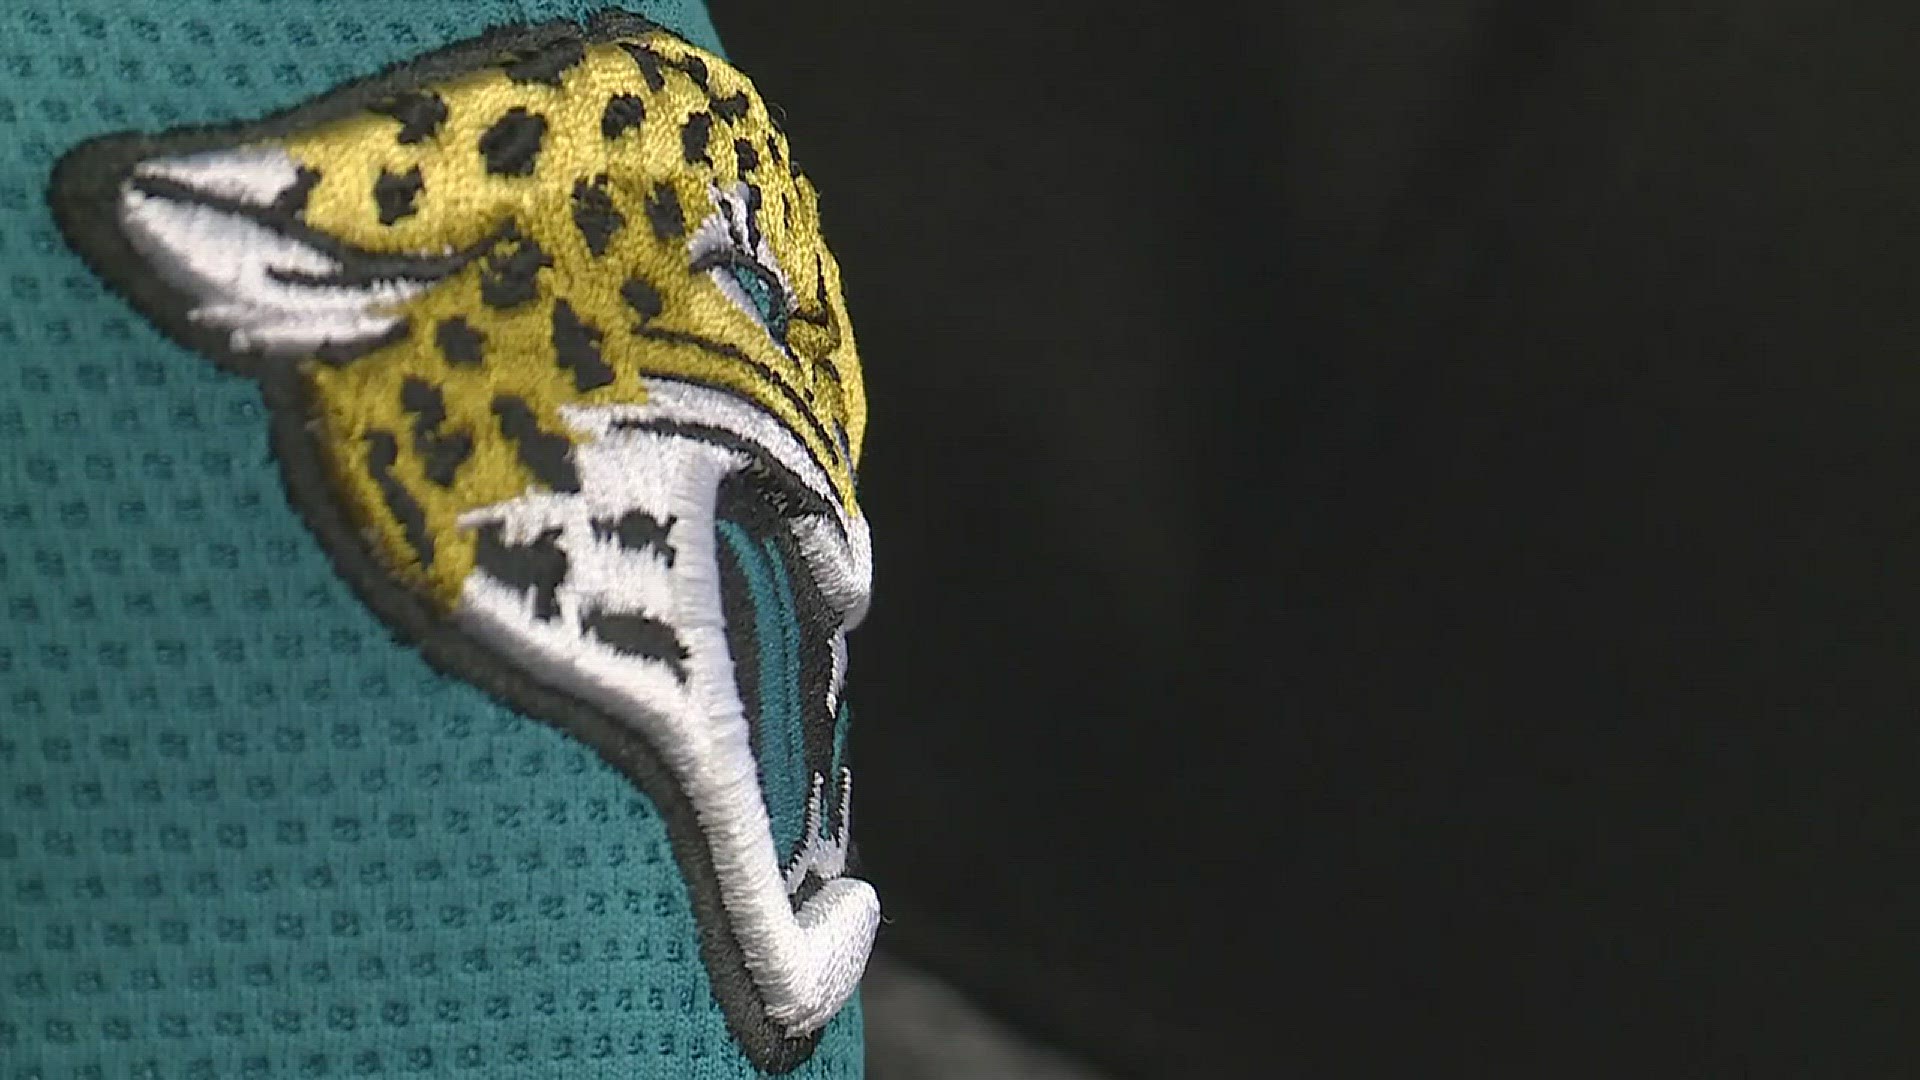 More than 100 Cincinnati Bengals fans have expressed their thanks to the Jacksonville Jaguars for beating the Pittsburgh Steelers on Sunday by donating to the Blake Bortles Foundation.